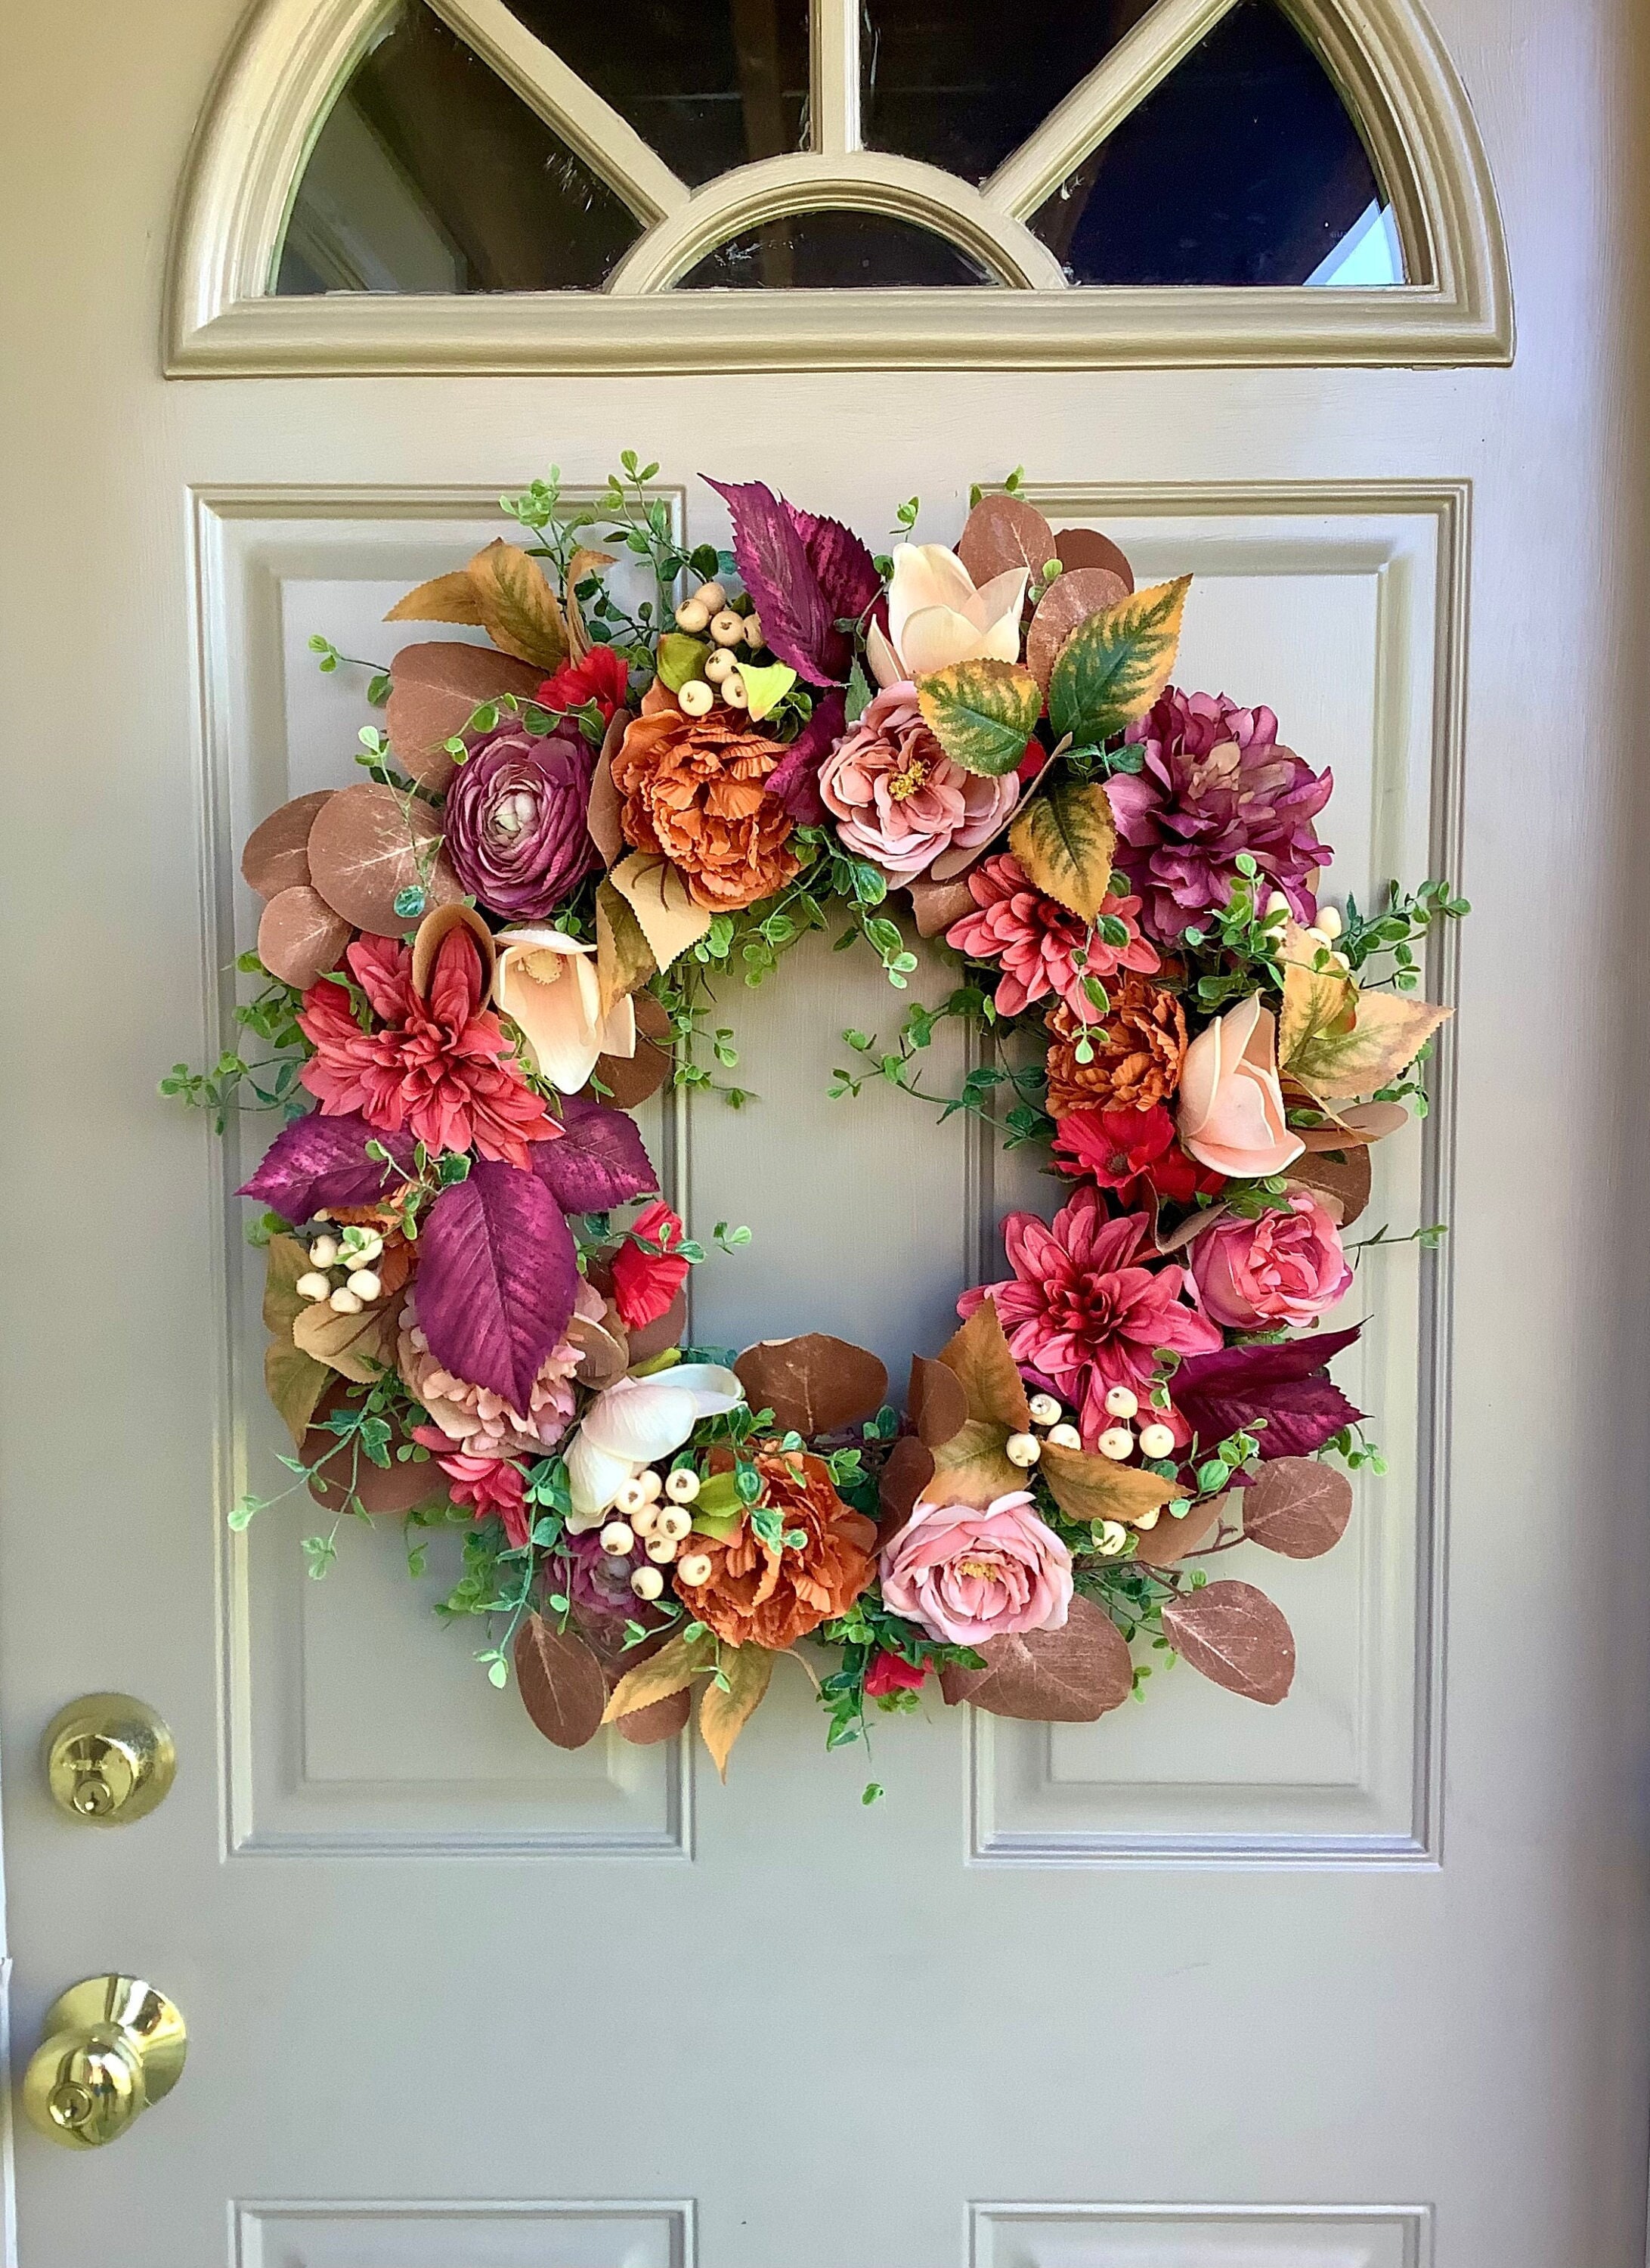 Updating a Fall Wreath Using Floral Picks - The Everyday Home